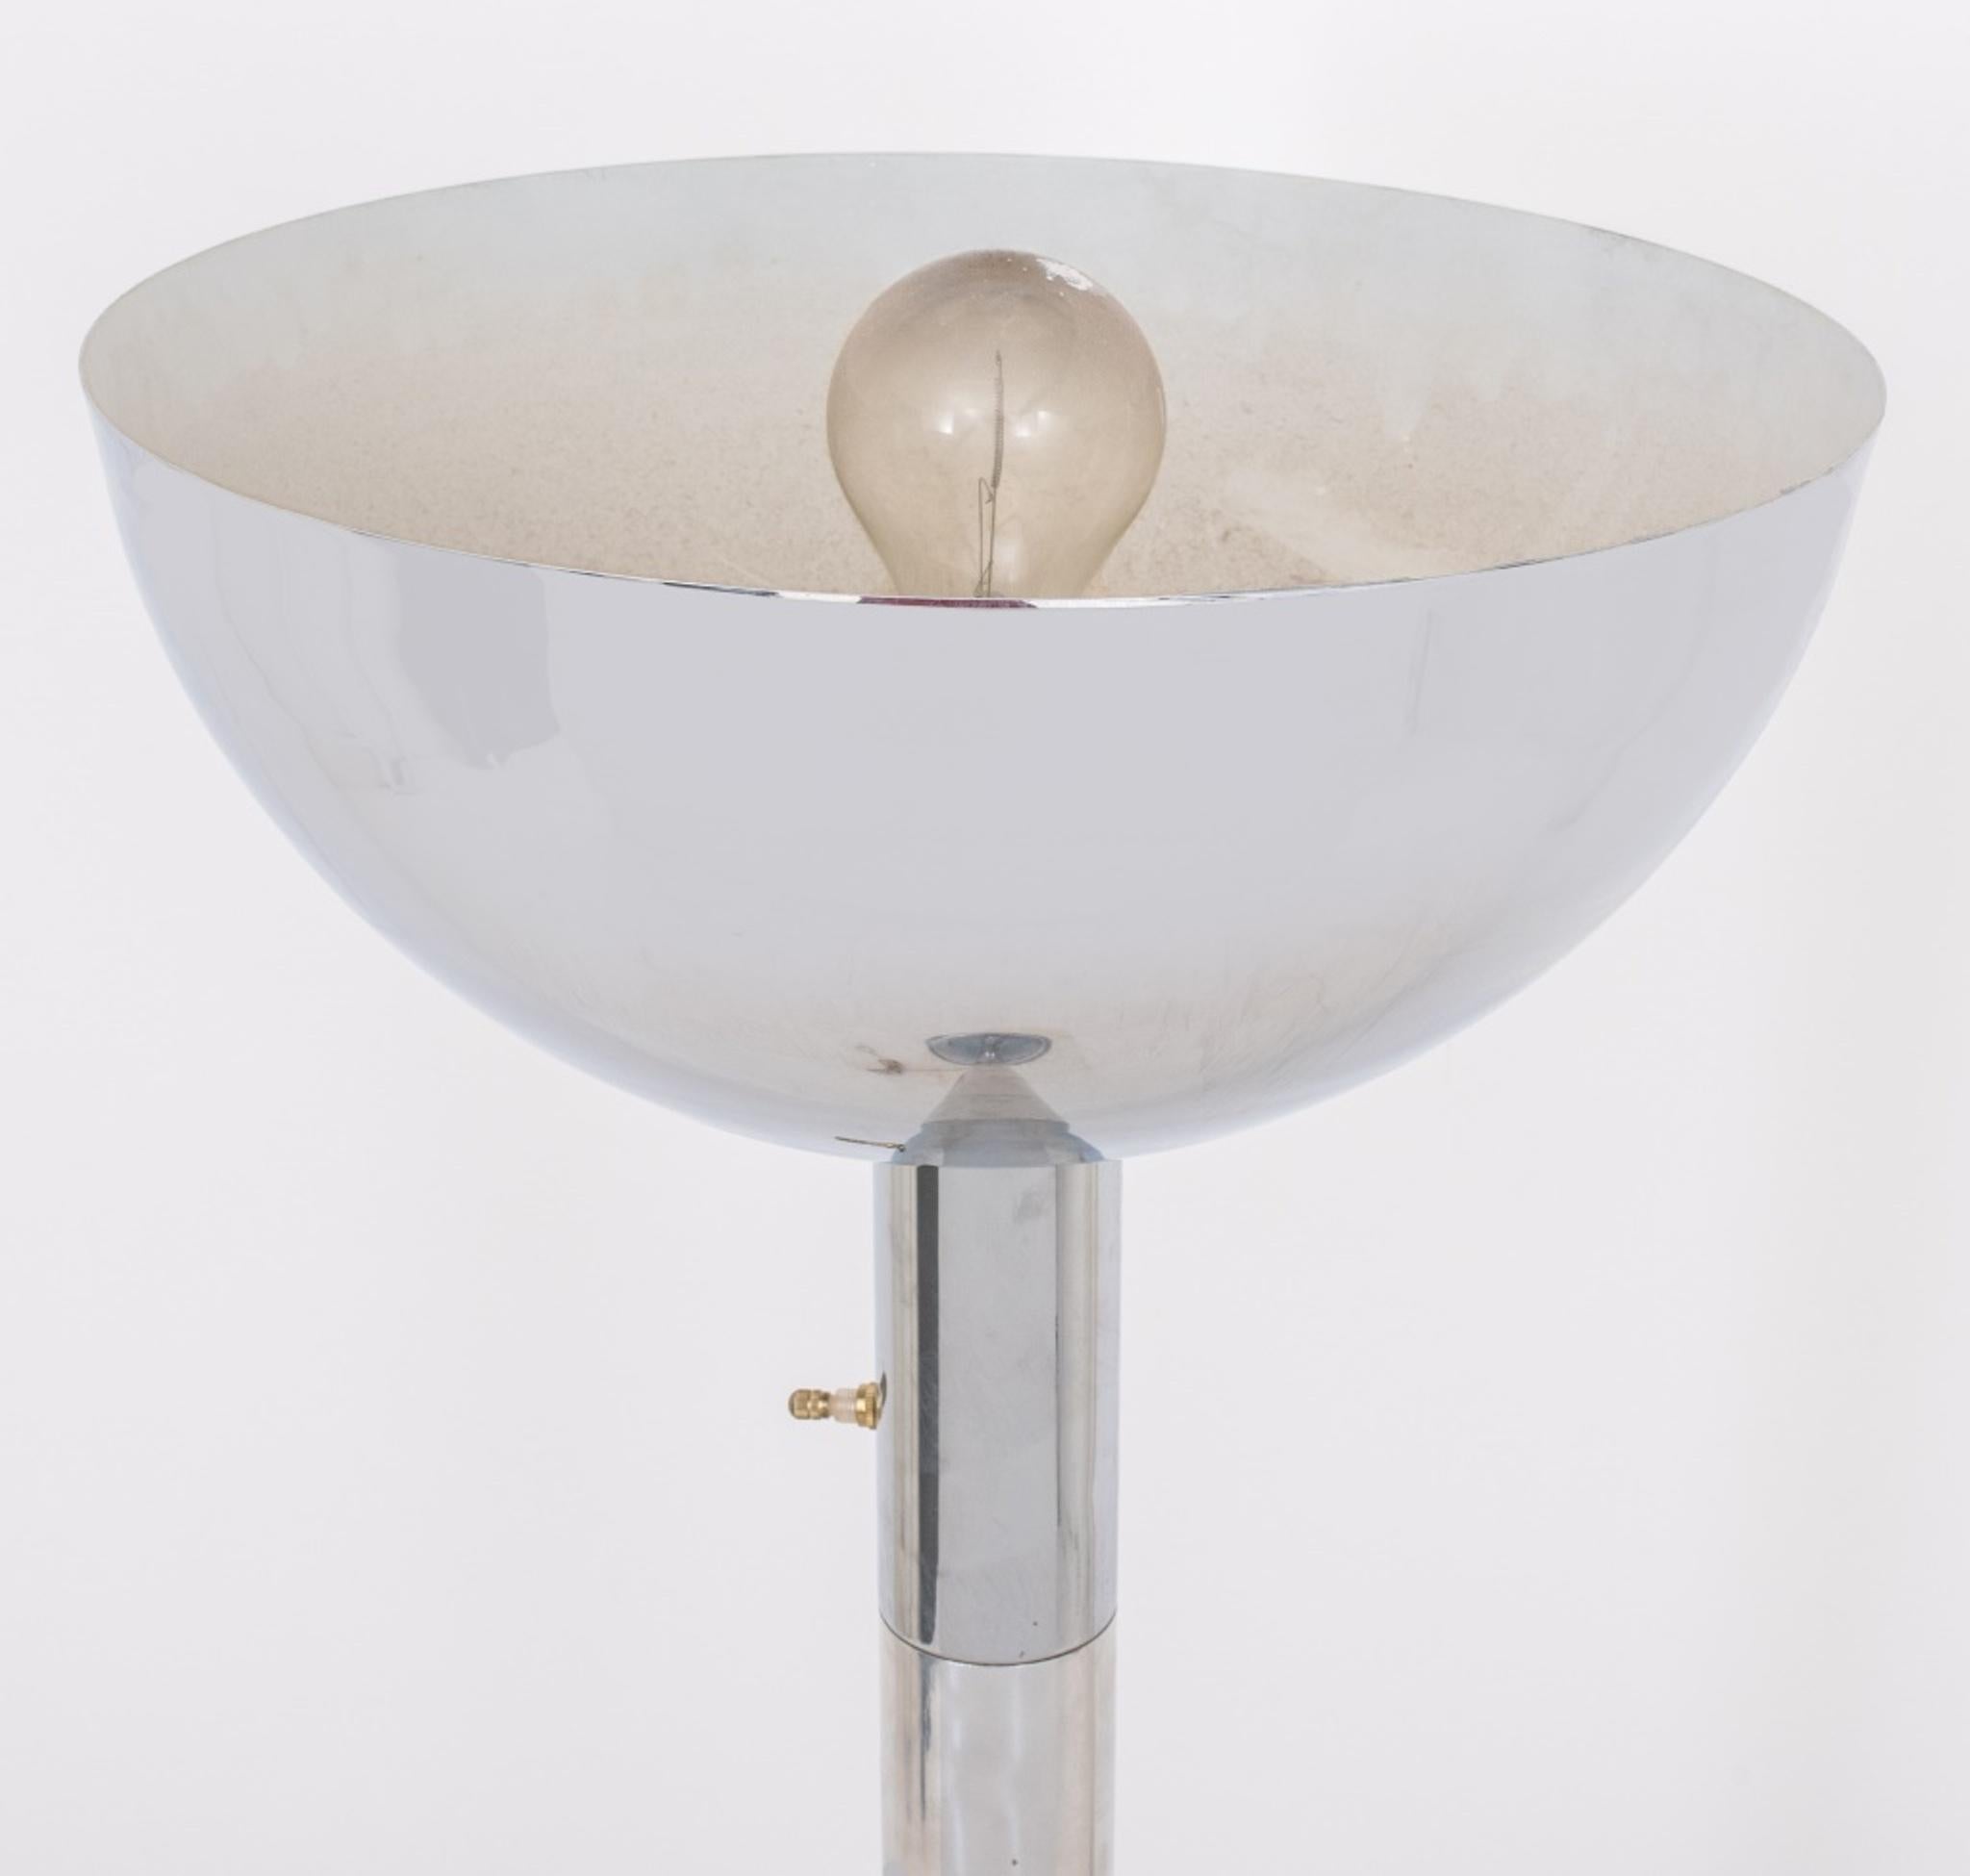 Art Deco Moderne Chrome Torchiere Floor Lamp In Good Condition For Sale In New York, NY